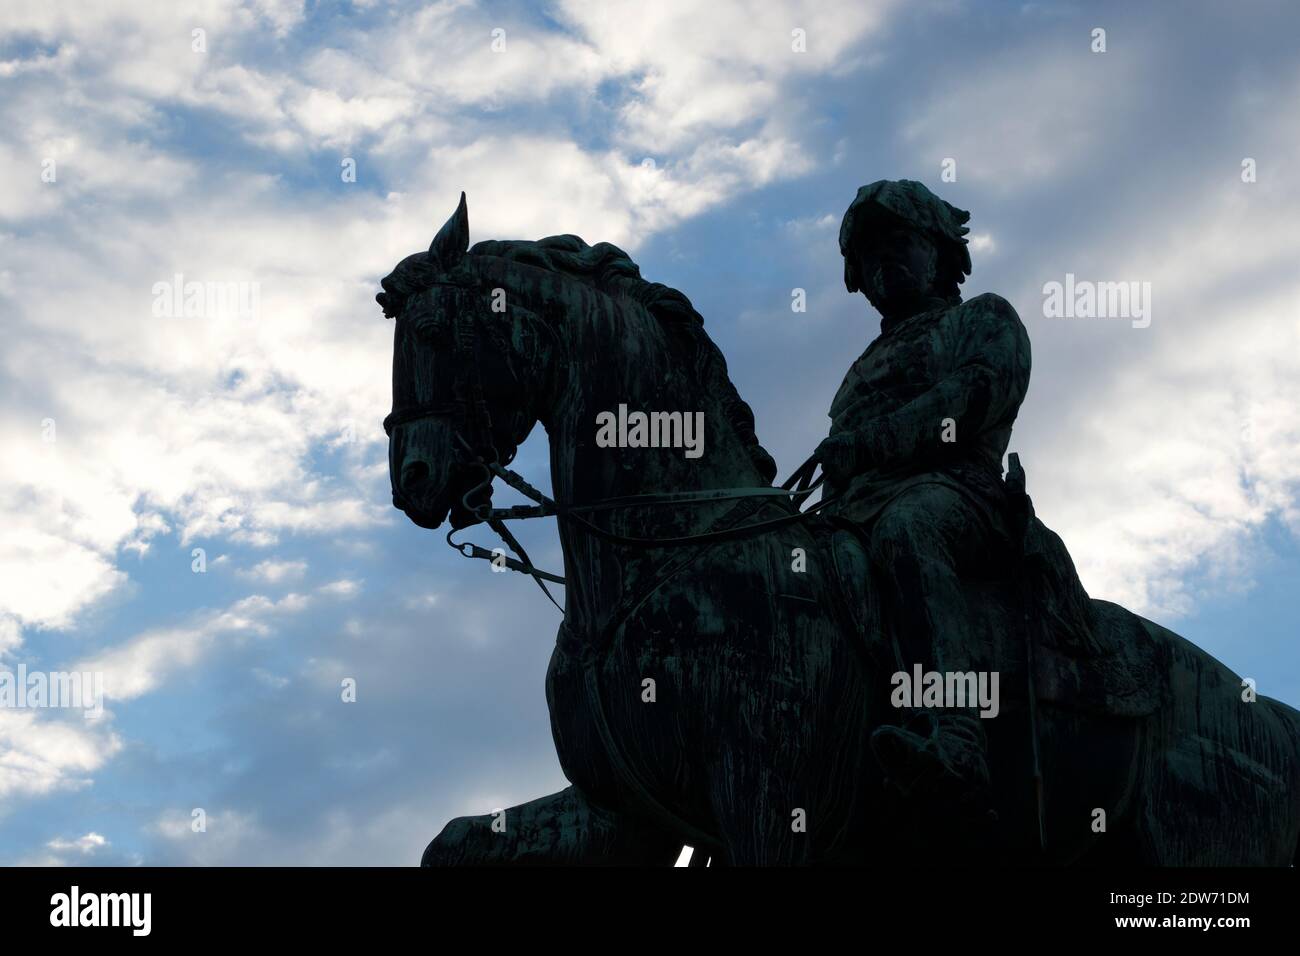 Silhouette of a dark metal statue of a soldier on a horse, standing boldly against a blue, cloudy sky. Stock Photo